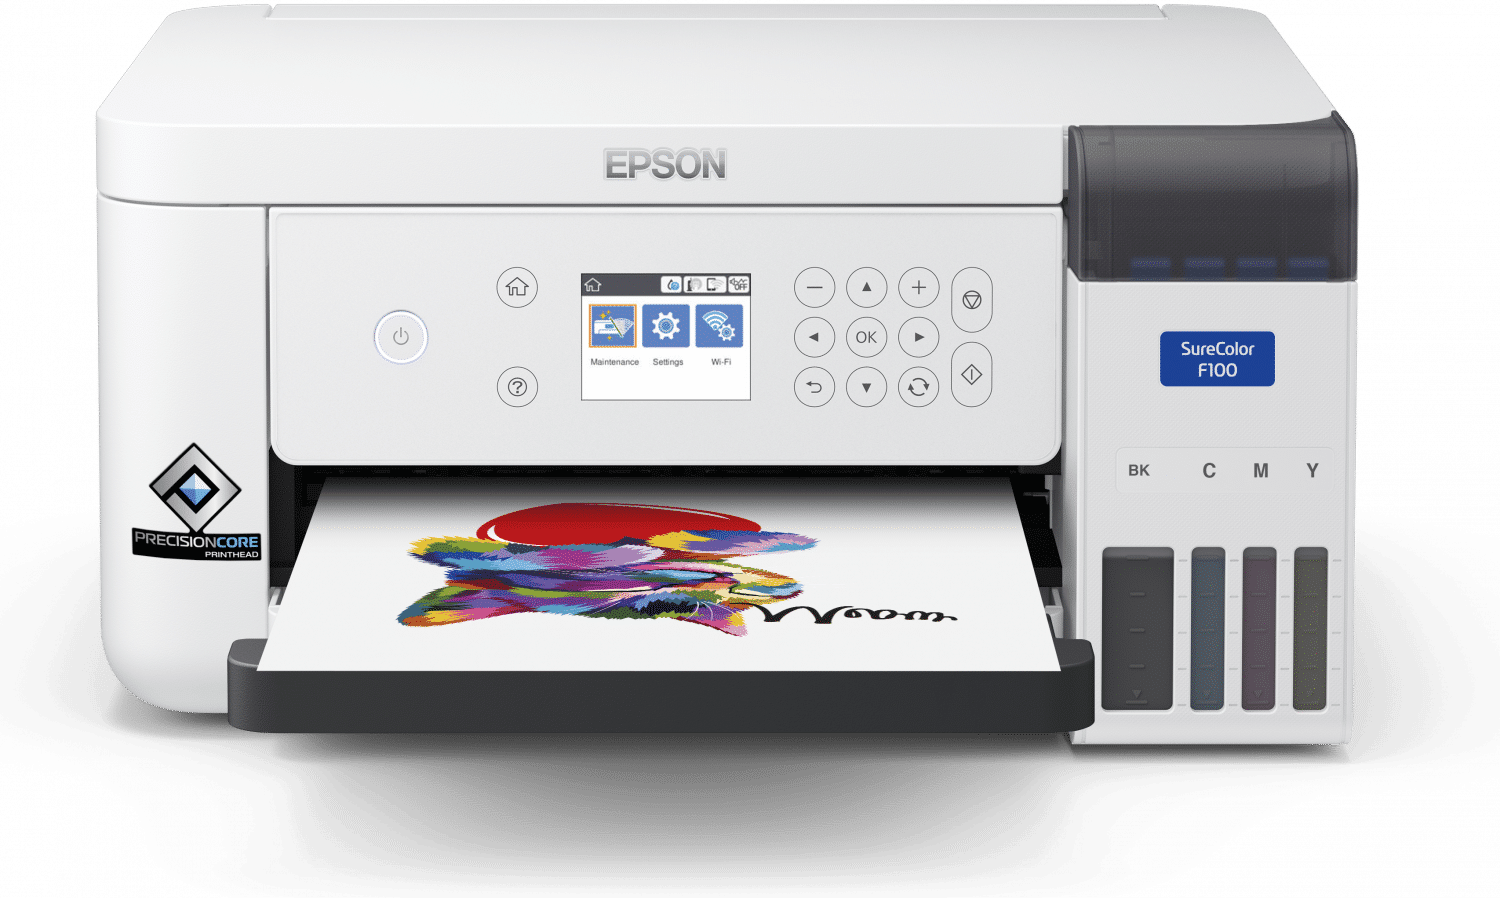 Epson SC-F100 A4 31340 productpicture hires c f100 front tray media 1.png 1 vikiallo